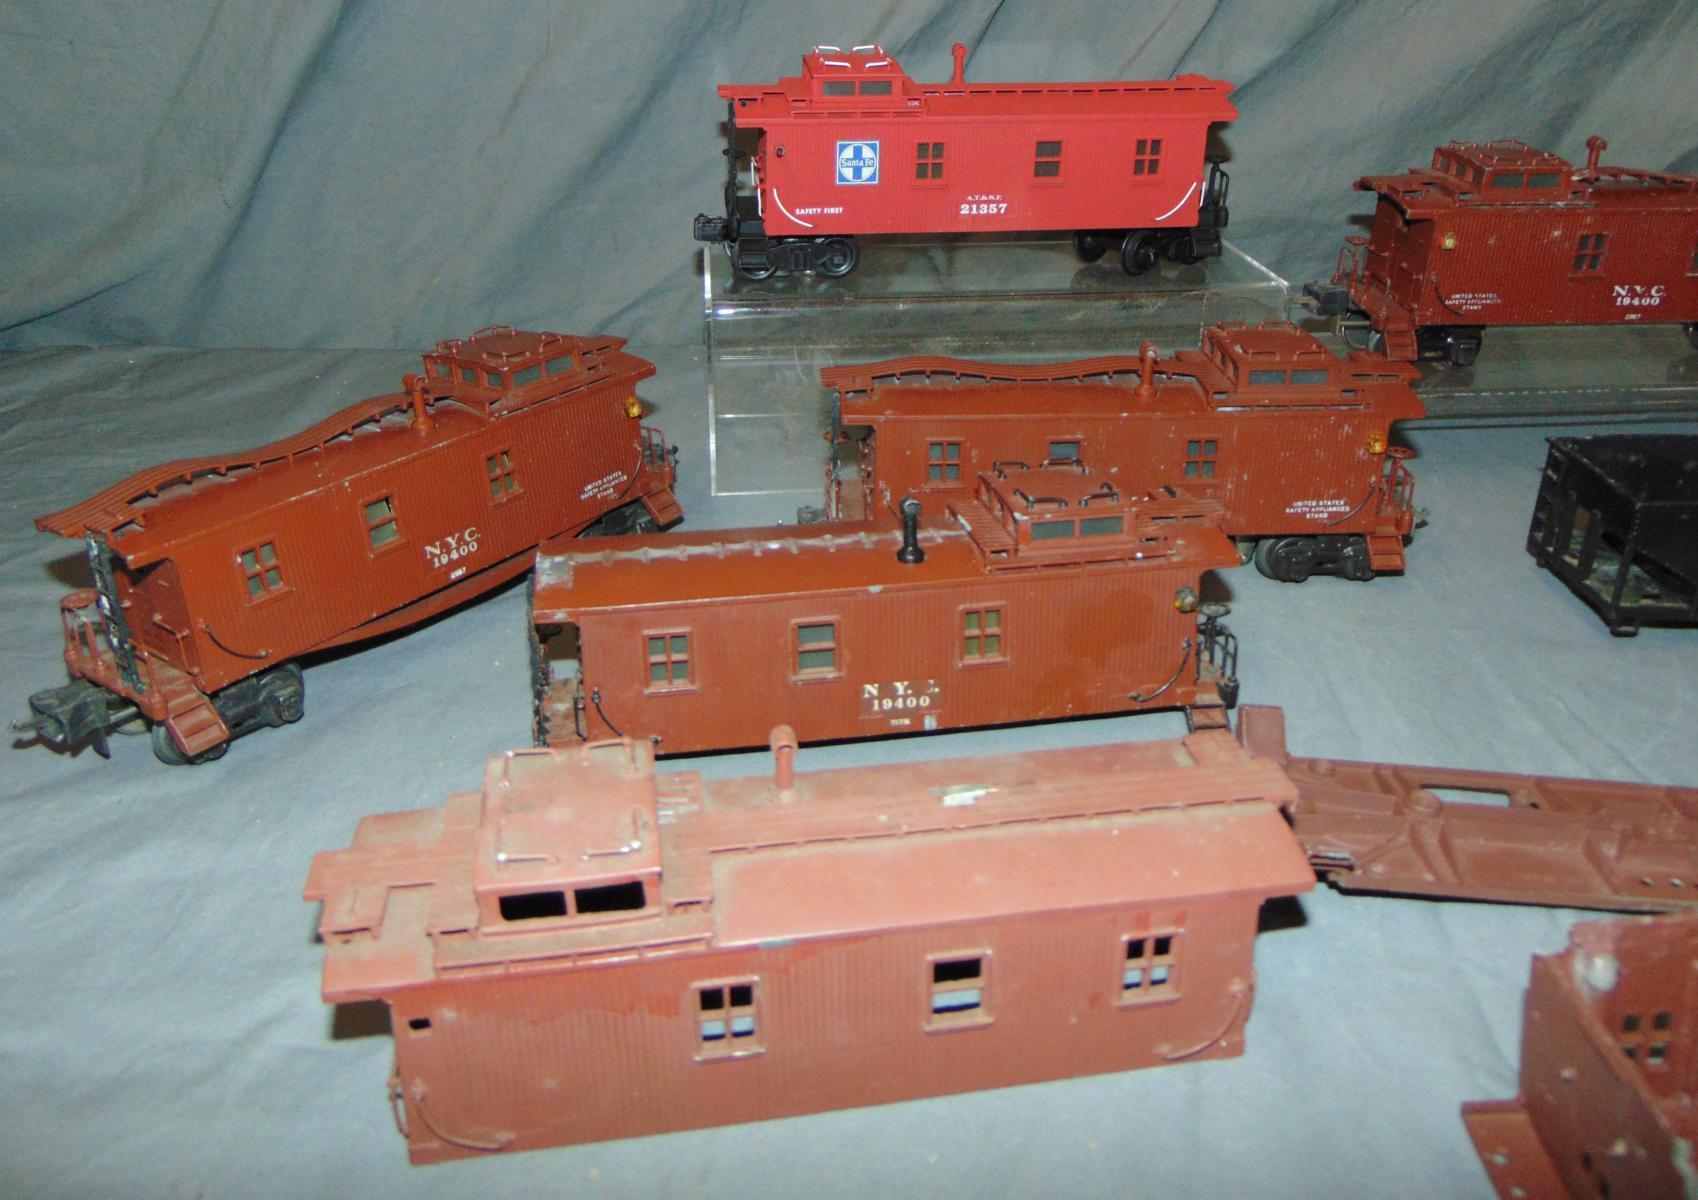 Group Lionel Semi-Scale Freight Car Projects